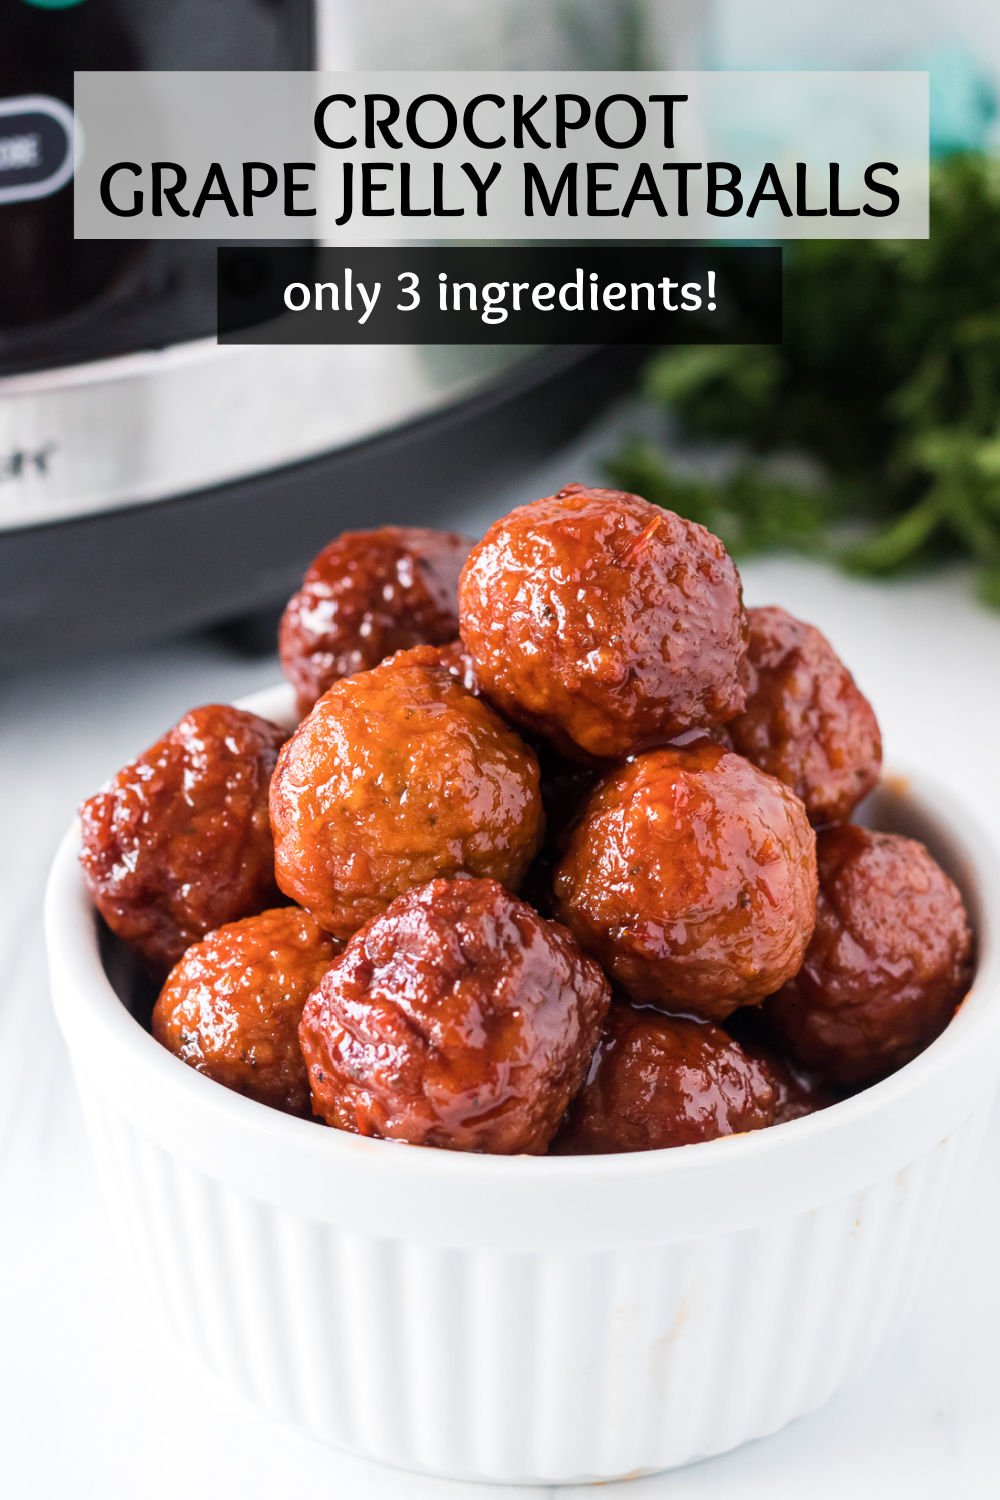 Tender meatballs slow cooked in a simple grape jelly and chili sauce. These meatballs make for the perfect simple savory party appetizer or easy dinner idea! | www.persnicketyplates.com